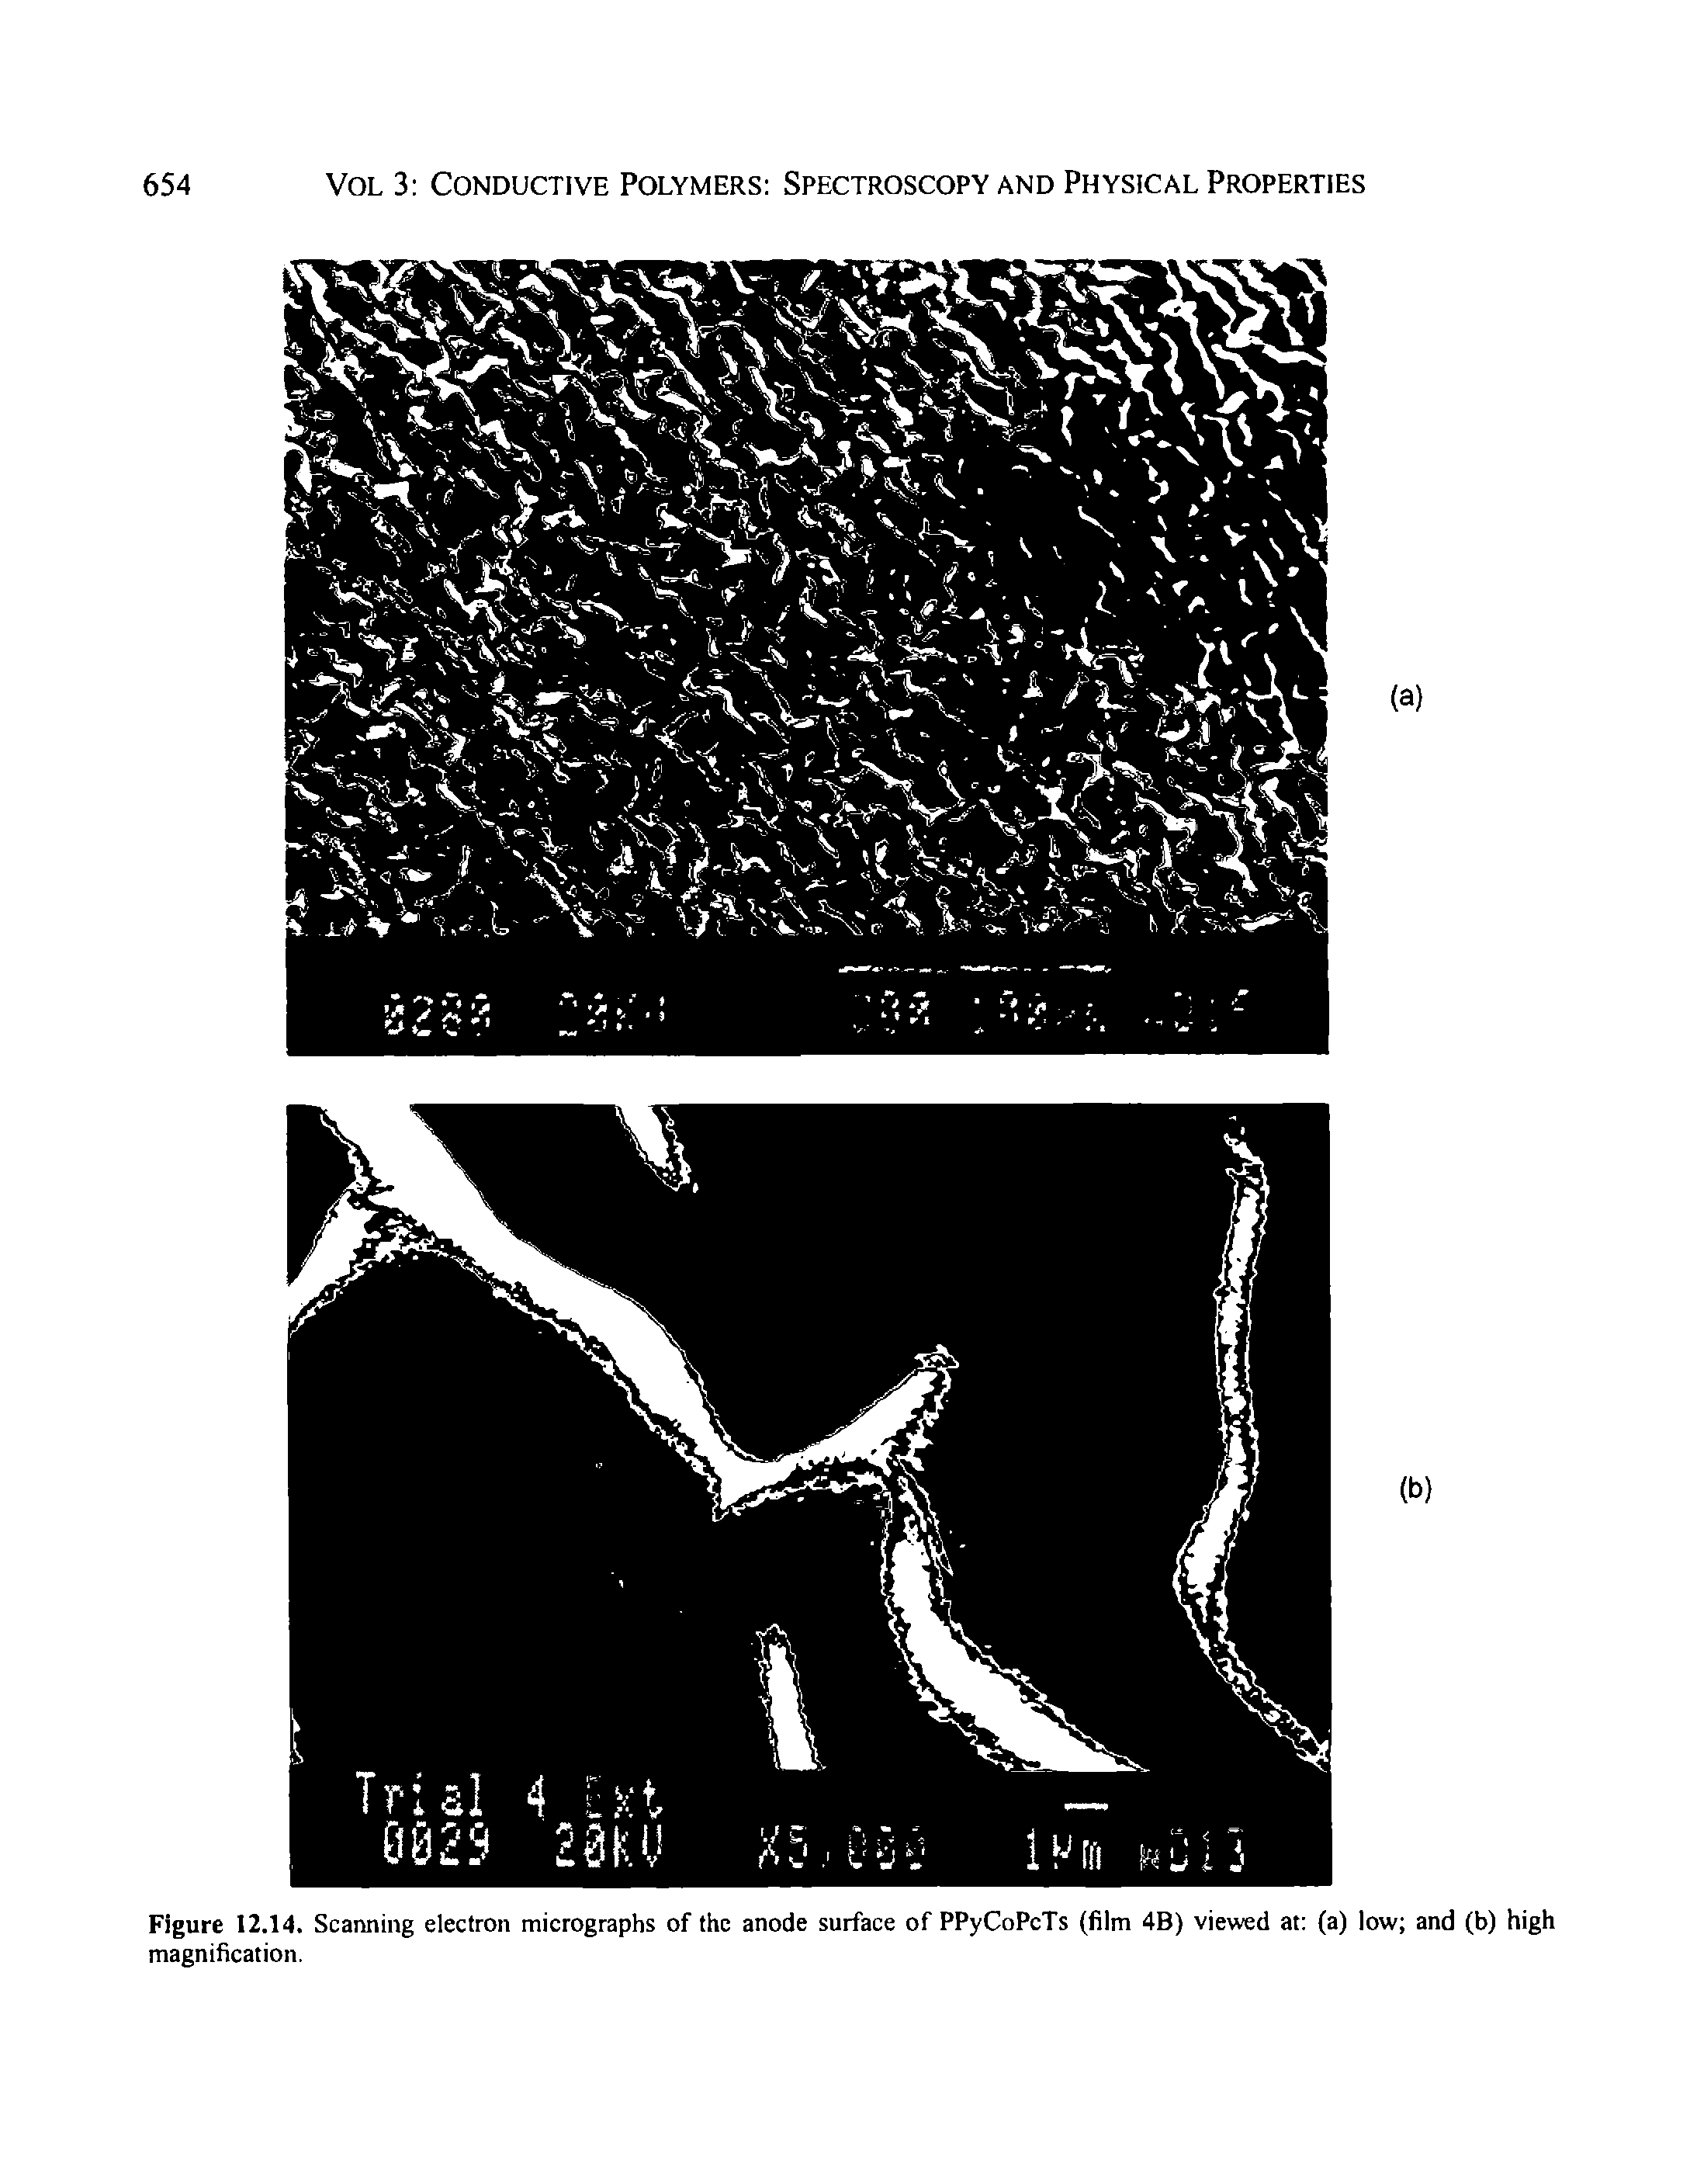 Figure 12.14. Scanning electron micrographs of the anode surface of PPyCoPcTs (film 4B) viewed at (a) low and (b) high magnification.